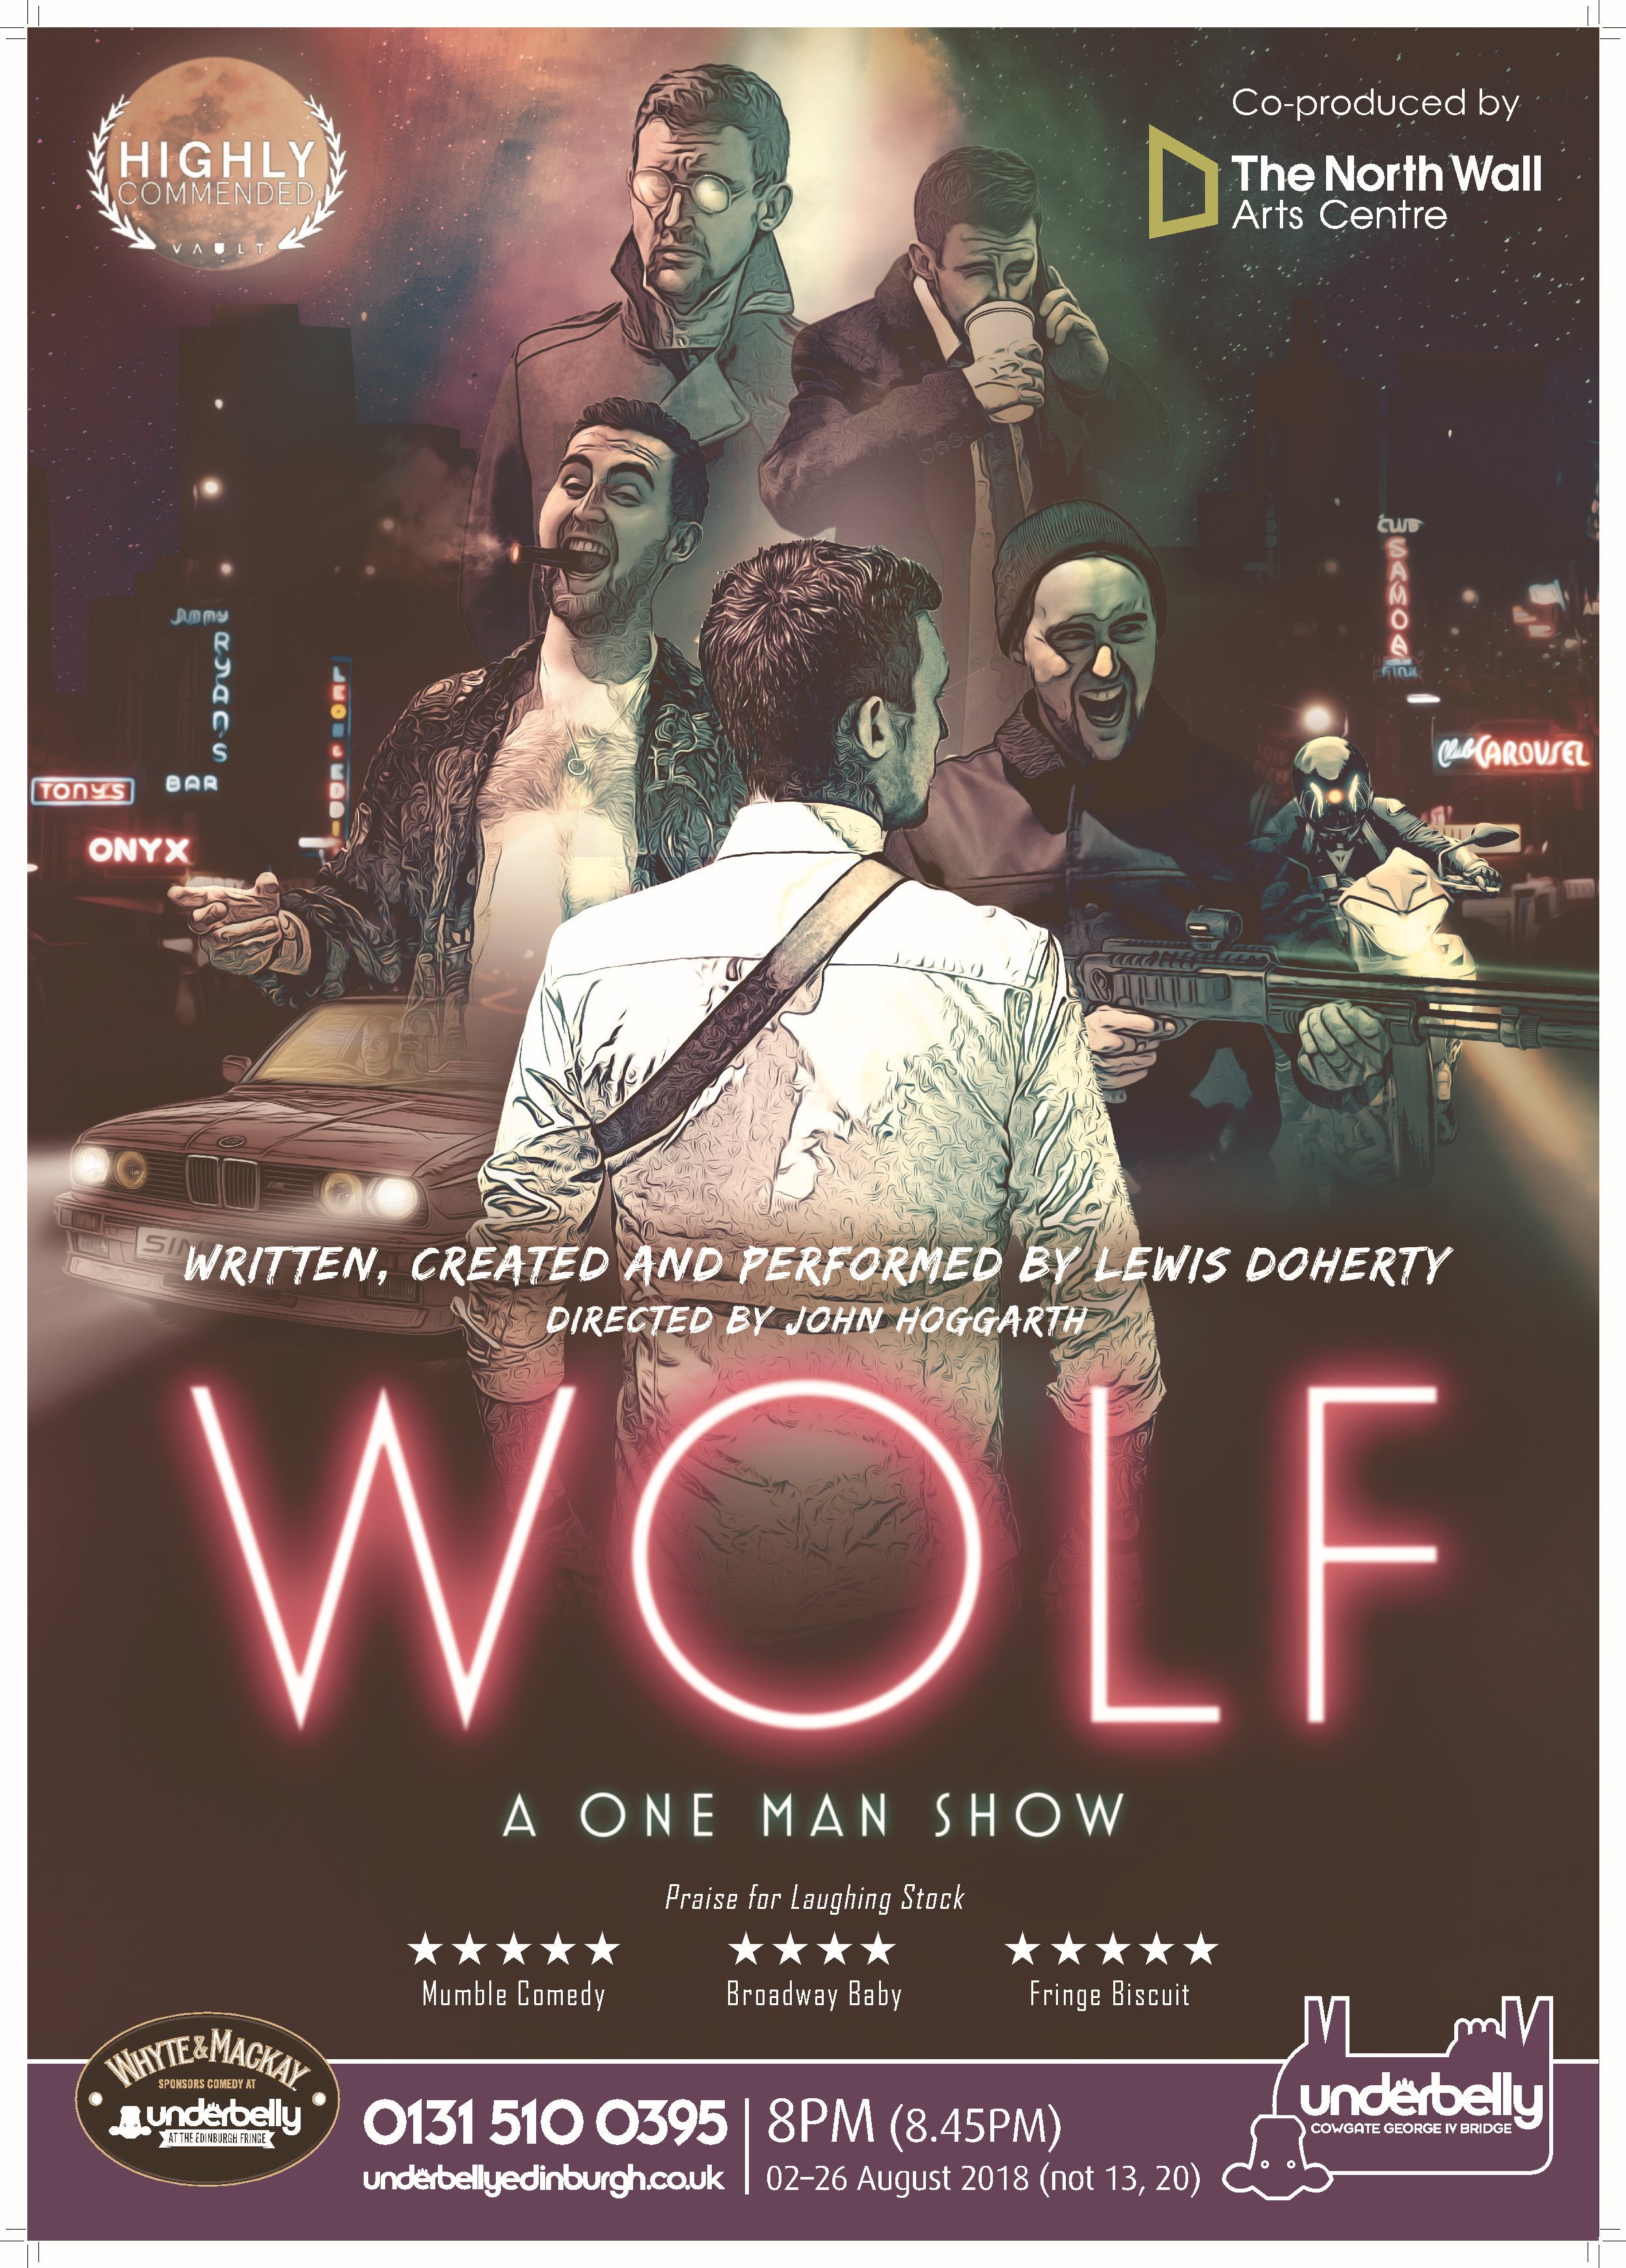 The poster for Wolf